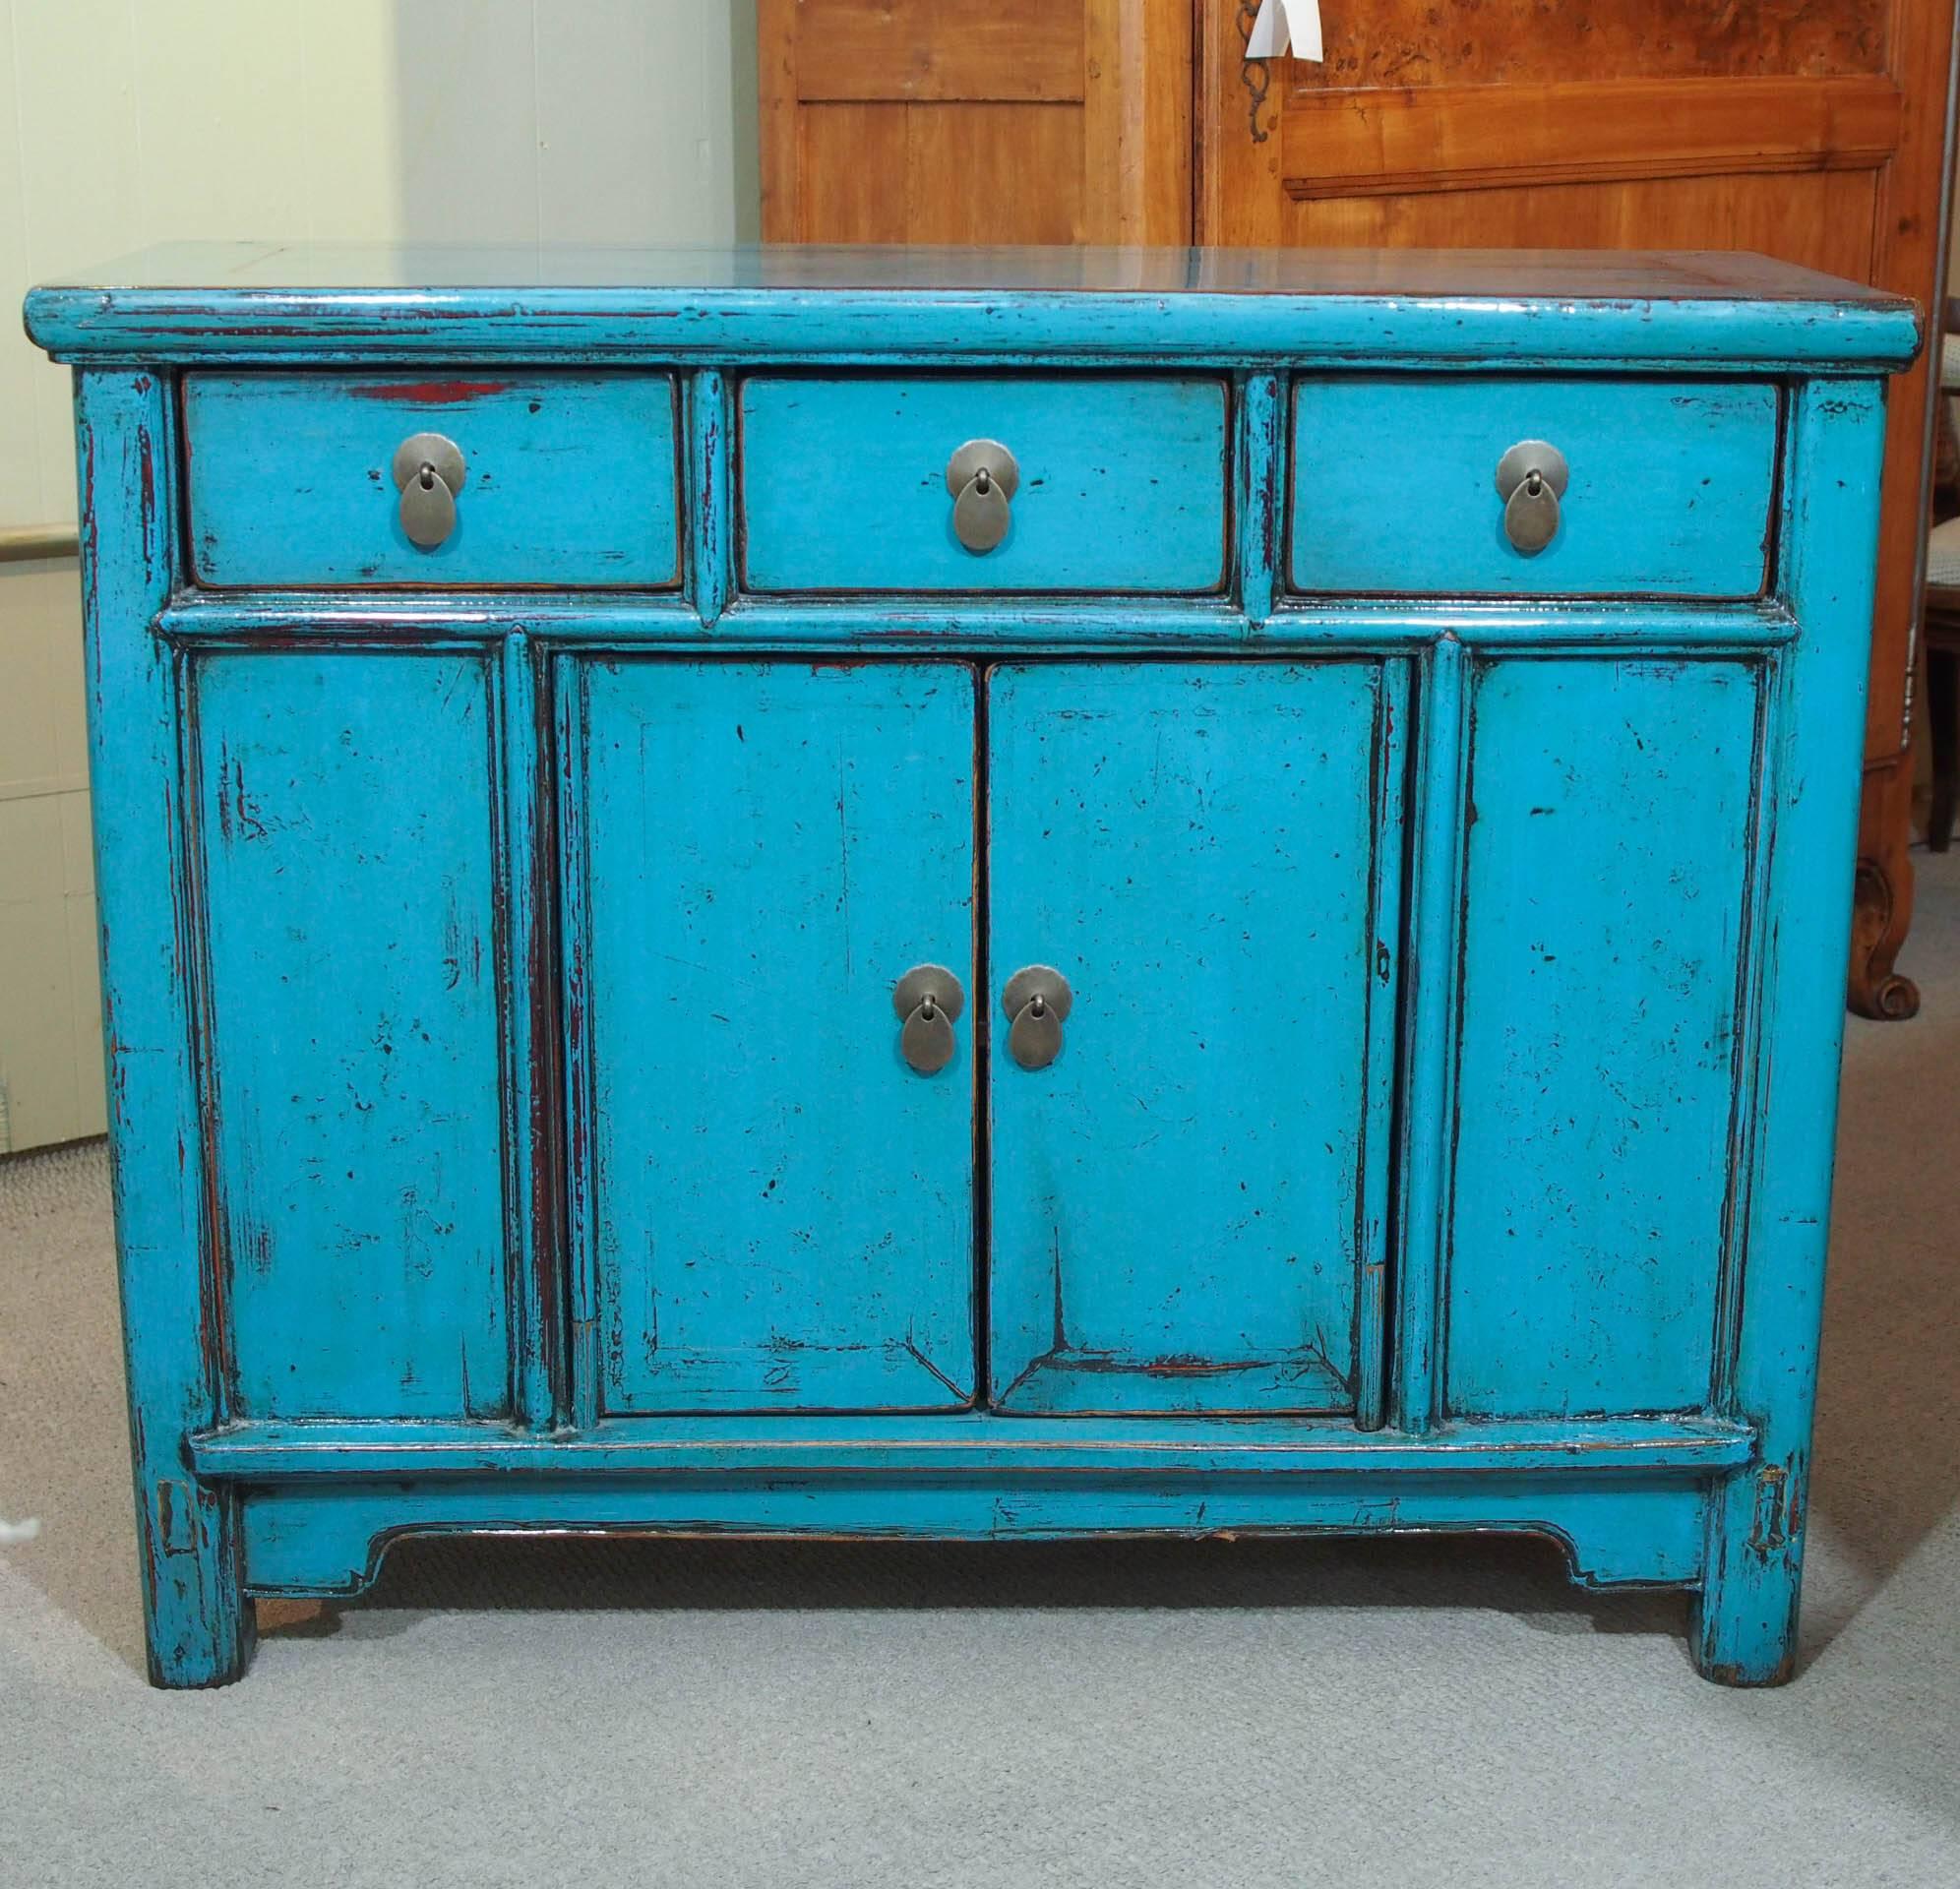 Antique Chinese turquoise lacquered cabinet.